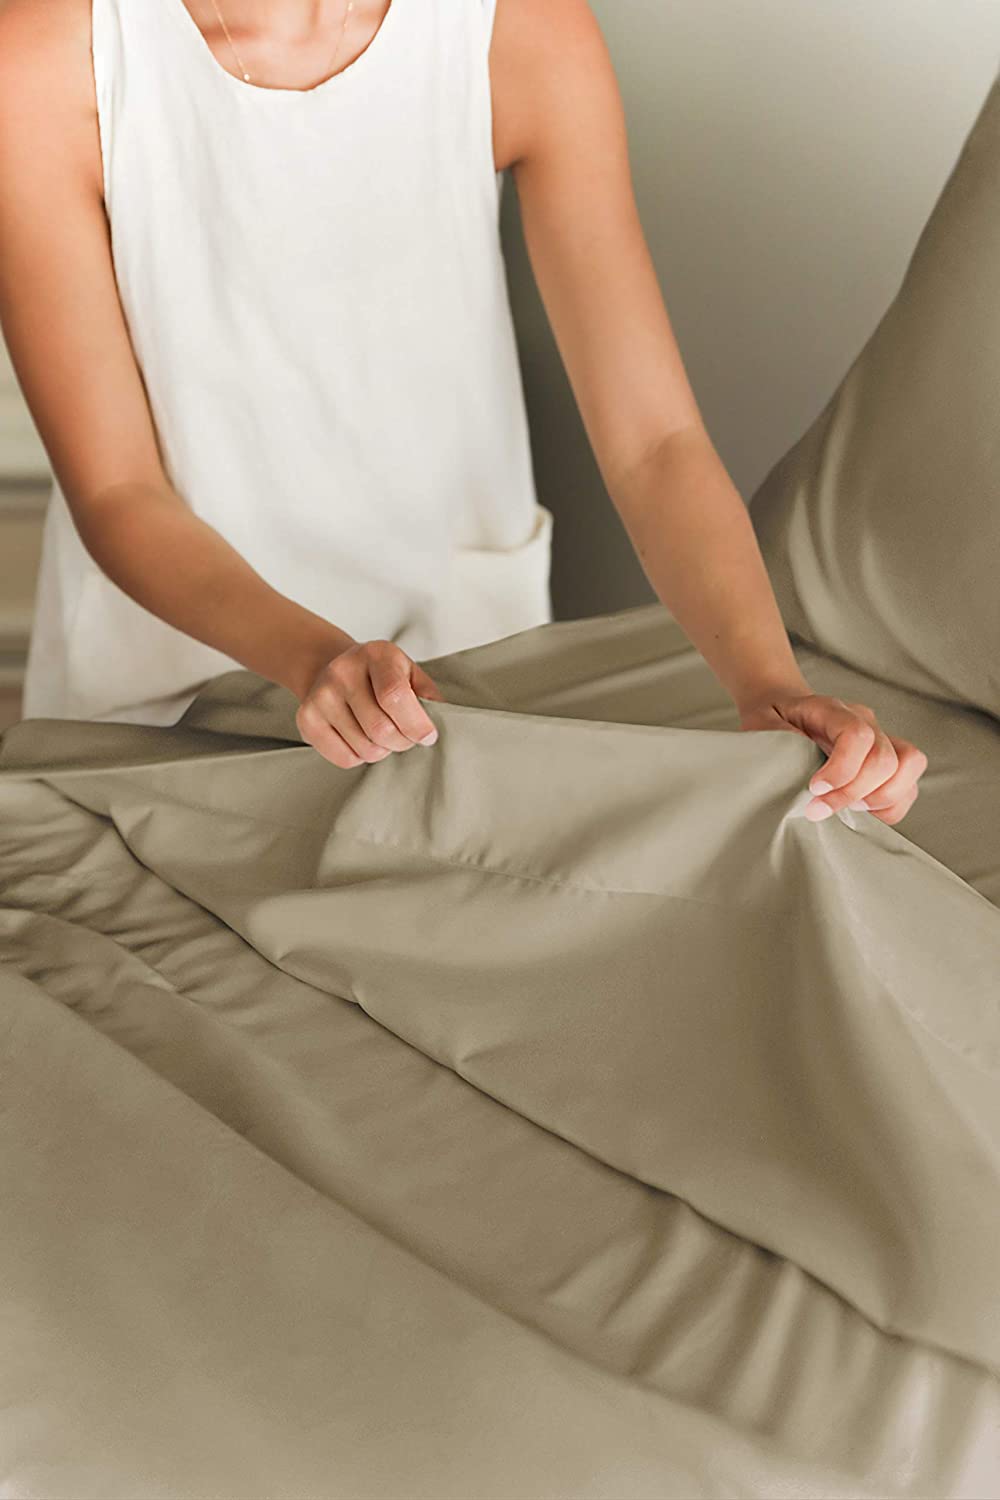 DeaLuxe Bedding 21” Queen Size Deep Pocket Fitted Sheet Only